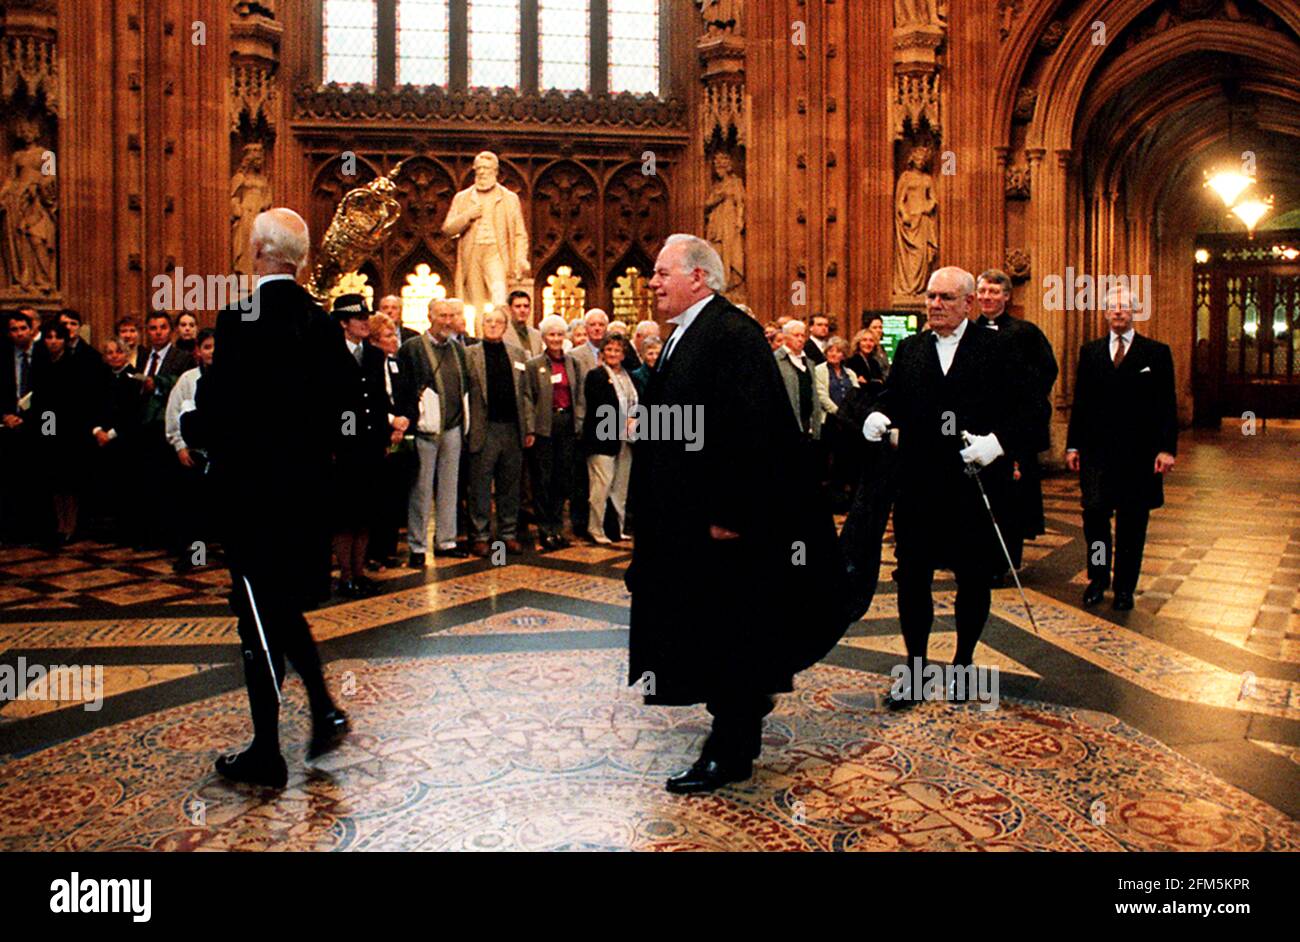 MICHAEL MARTIN, OCTOBER 2000 NEW SPEAKER OF THE HOUSE OF COMMONS, PROCESSES THROUGH CENTRAL LOBBY TO PRESIDE OVER HIS FIRST SITTING OF THE HOUSE AS SPEAKER. Stock Photo